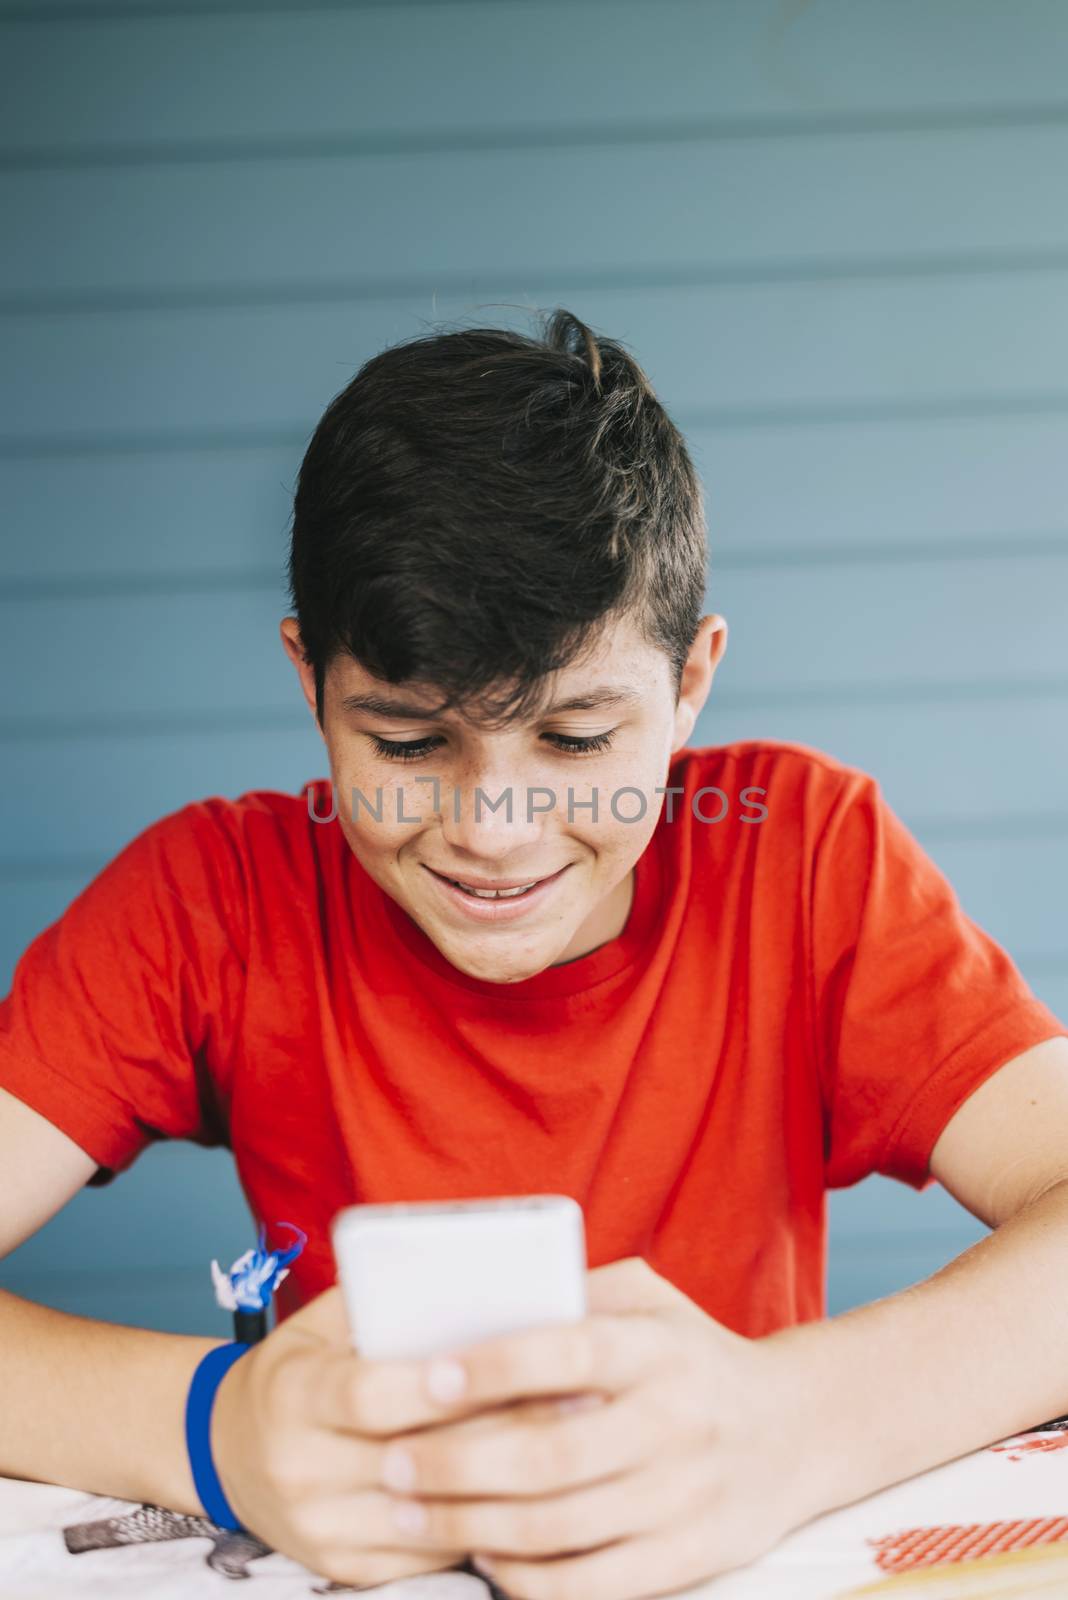 Handsome Caucasian 13-year old boy wearing red t-shirt sitting outdoors using electronic gadget by raferto1973